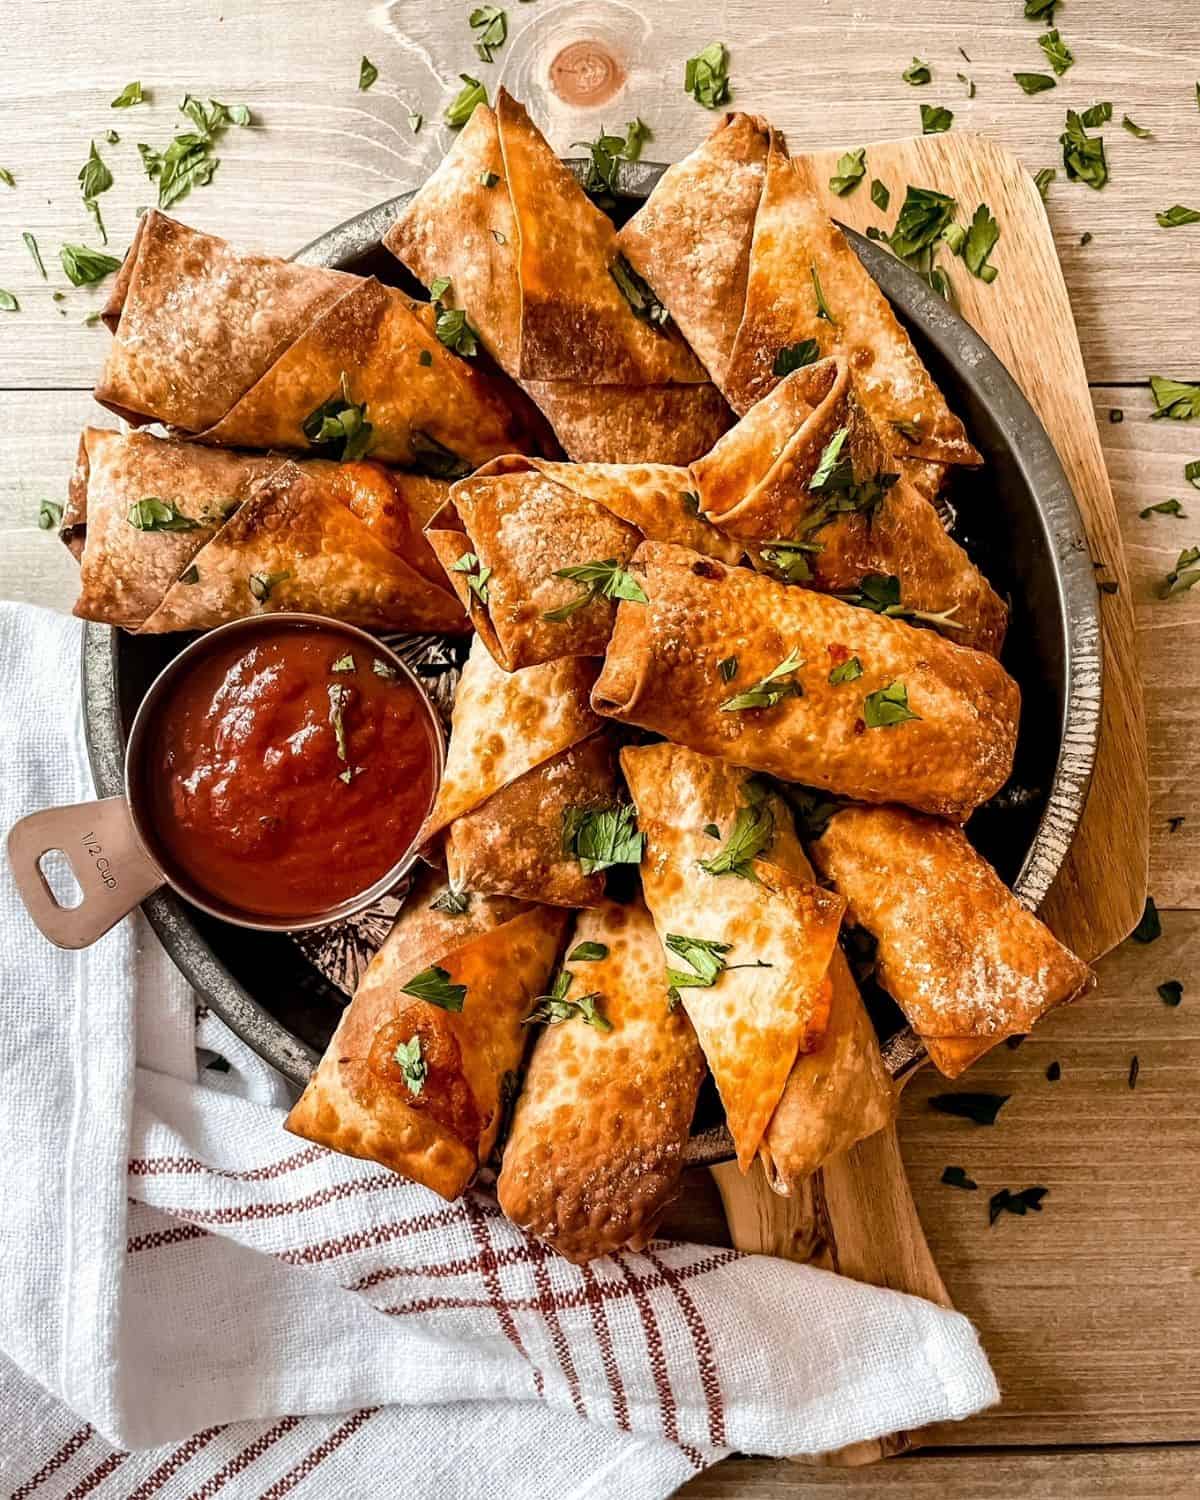 air fryer pizza rolls in a silver round pie plate, on a wooden cutting board, garnished with parsley, with a red and white striped dish towel in the bottom left corner